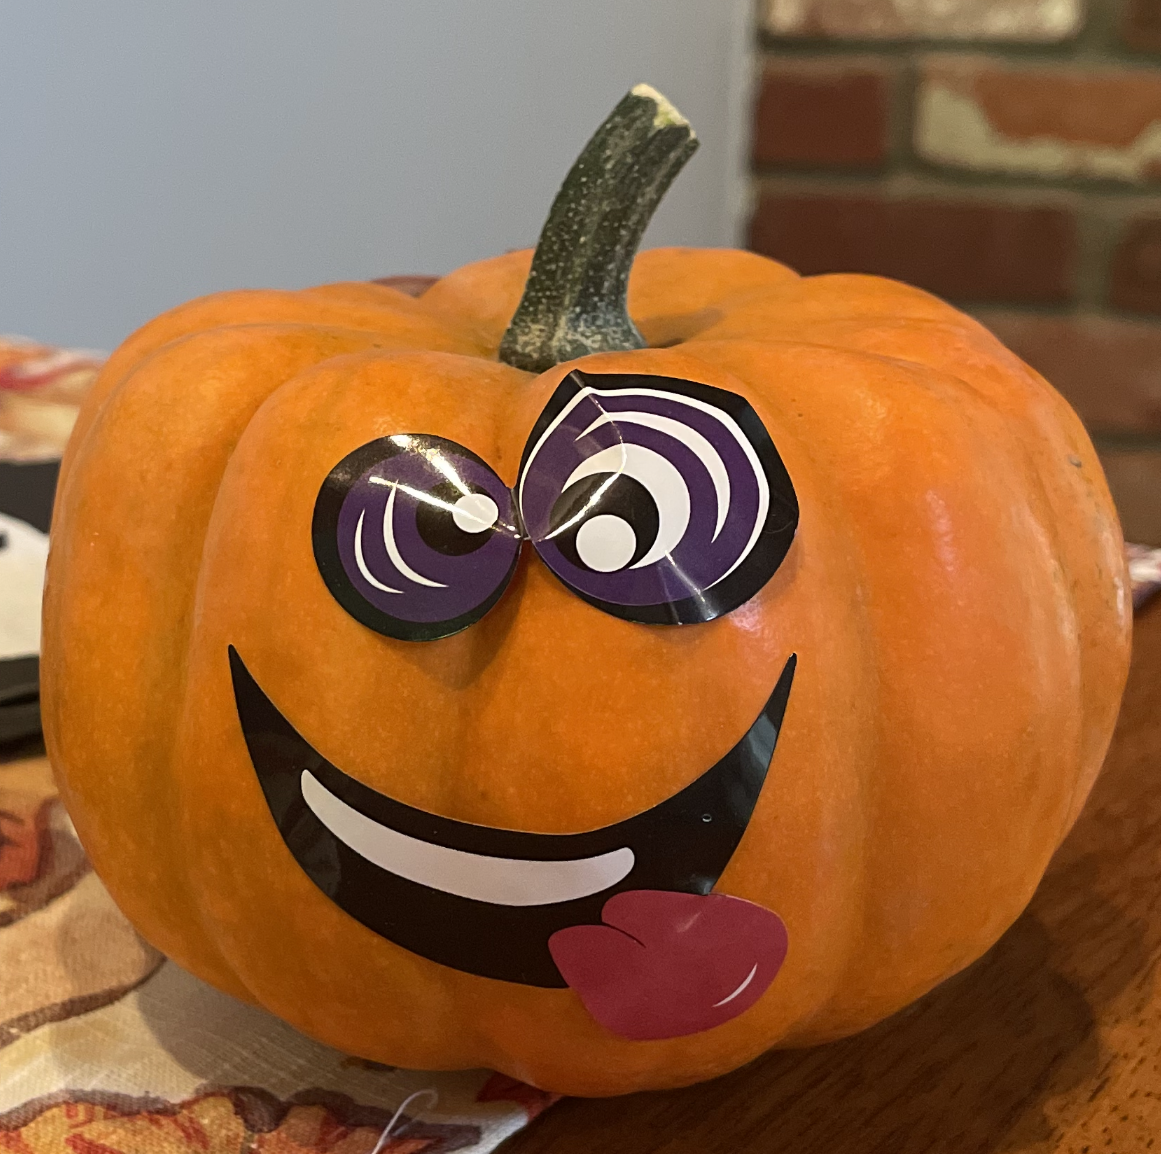 Decorated pumpkin with stickers.